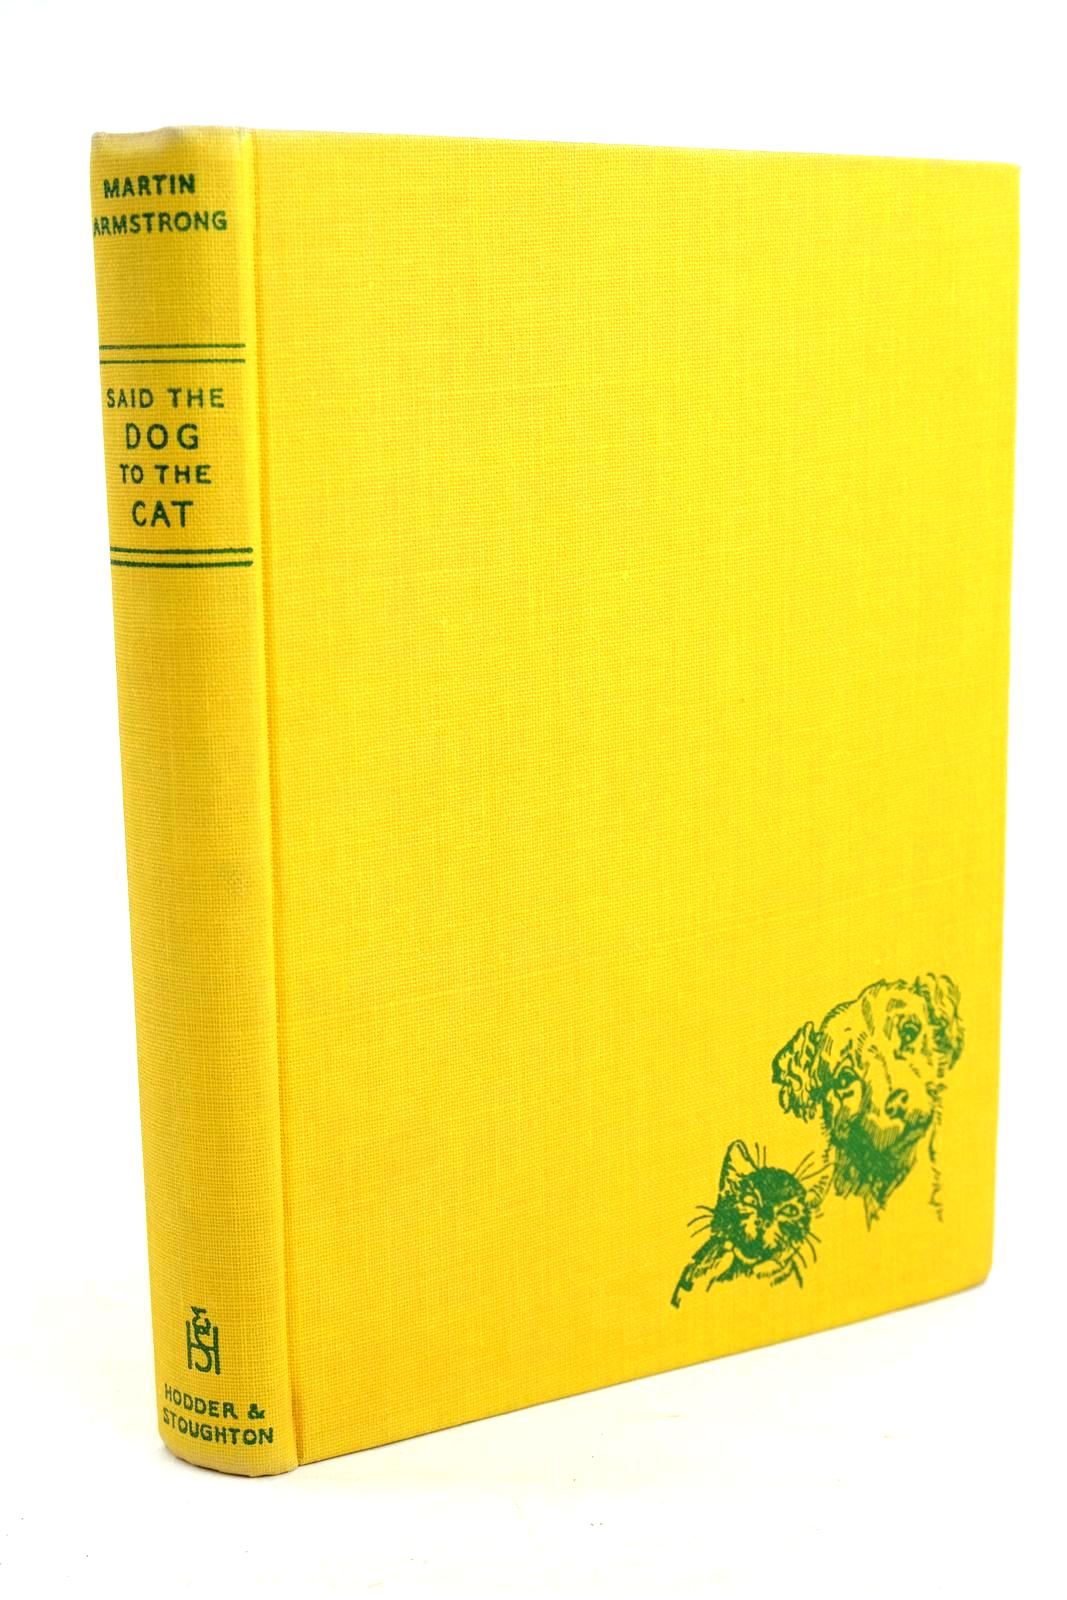 Photo of SAID THE DOG TO THE CAT written by Armstrong, Martin illustrated by May, F. Stocks published by Hodder & Stoughton (STOCK CODE: 1320476)  for sale by Stella & Rose's Books